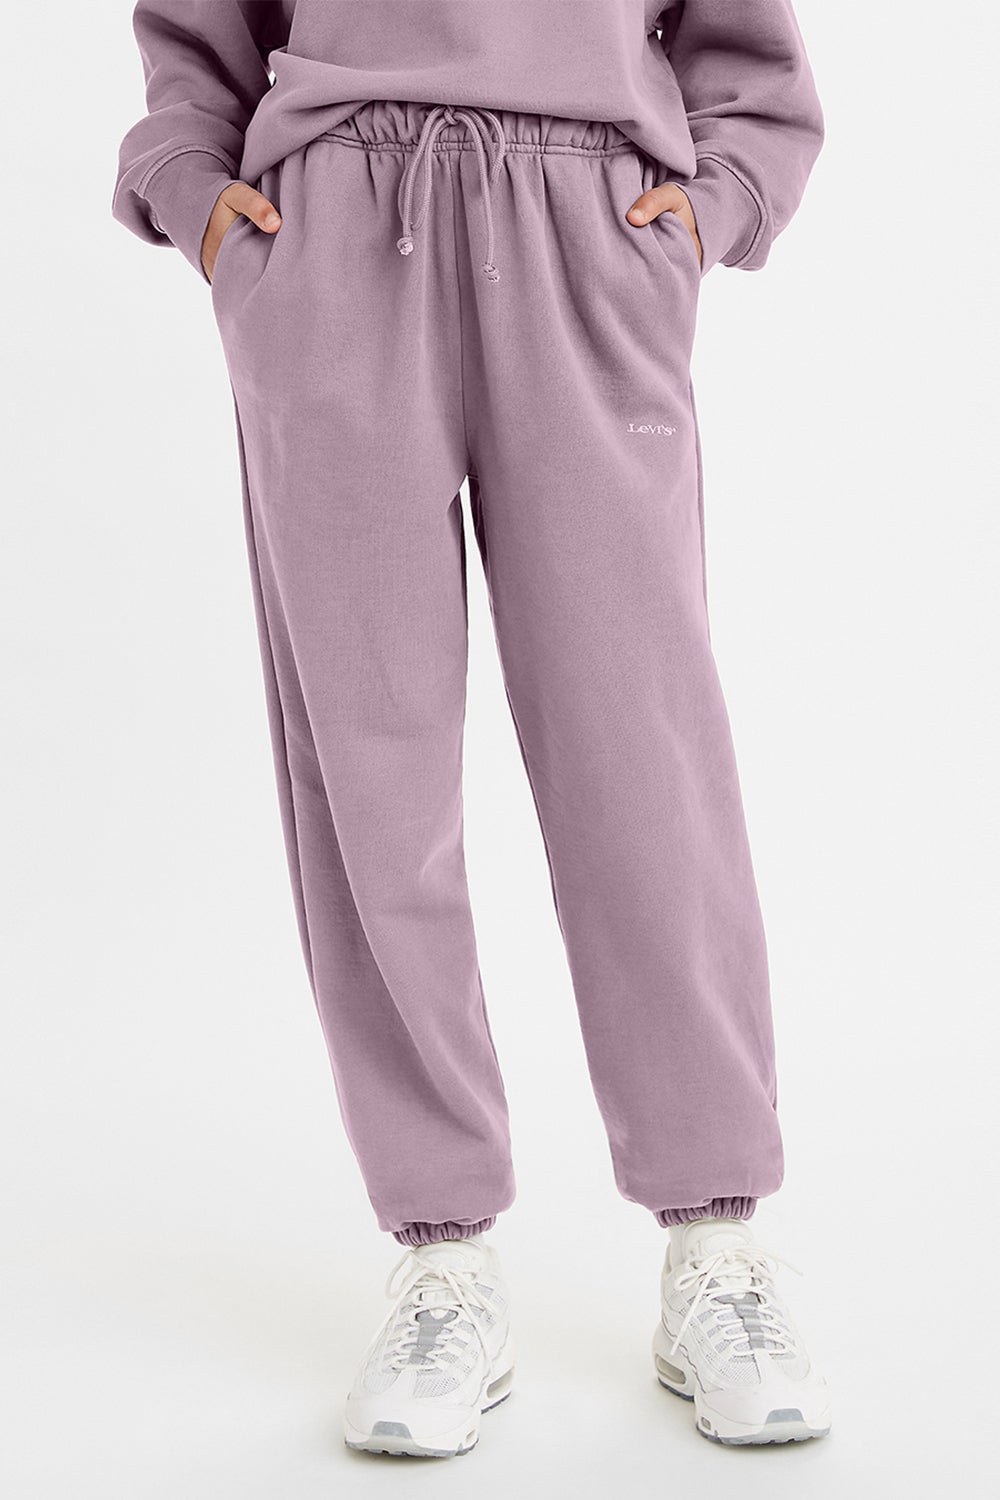 levi's Work From Home Sweatpants Winsome Orchid